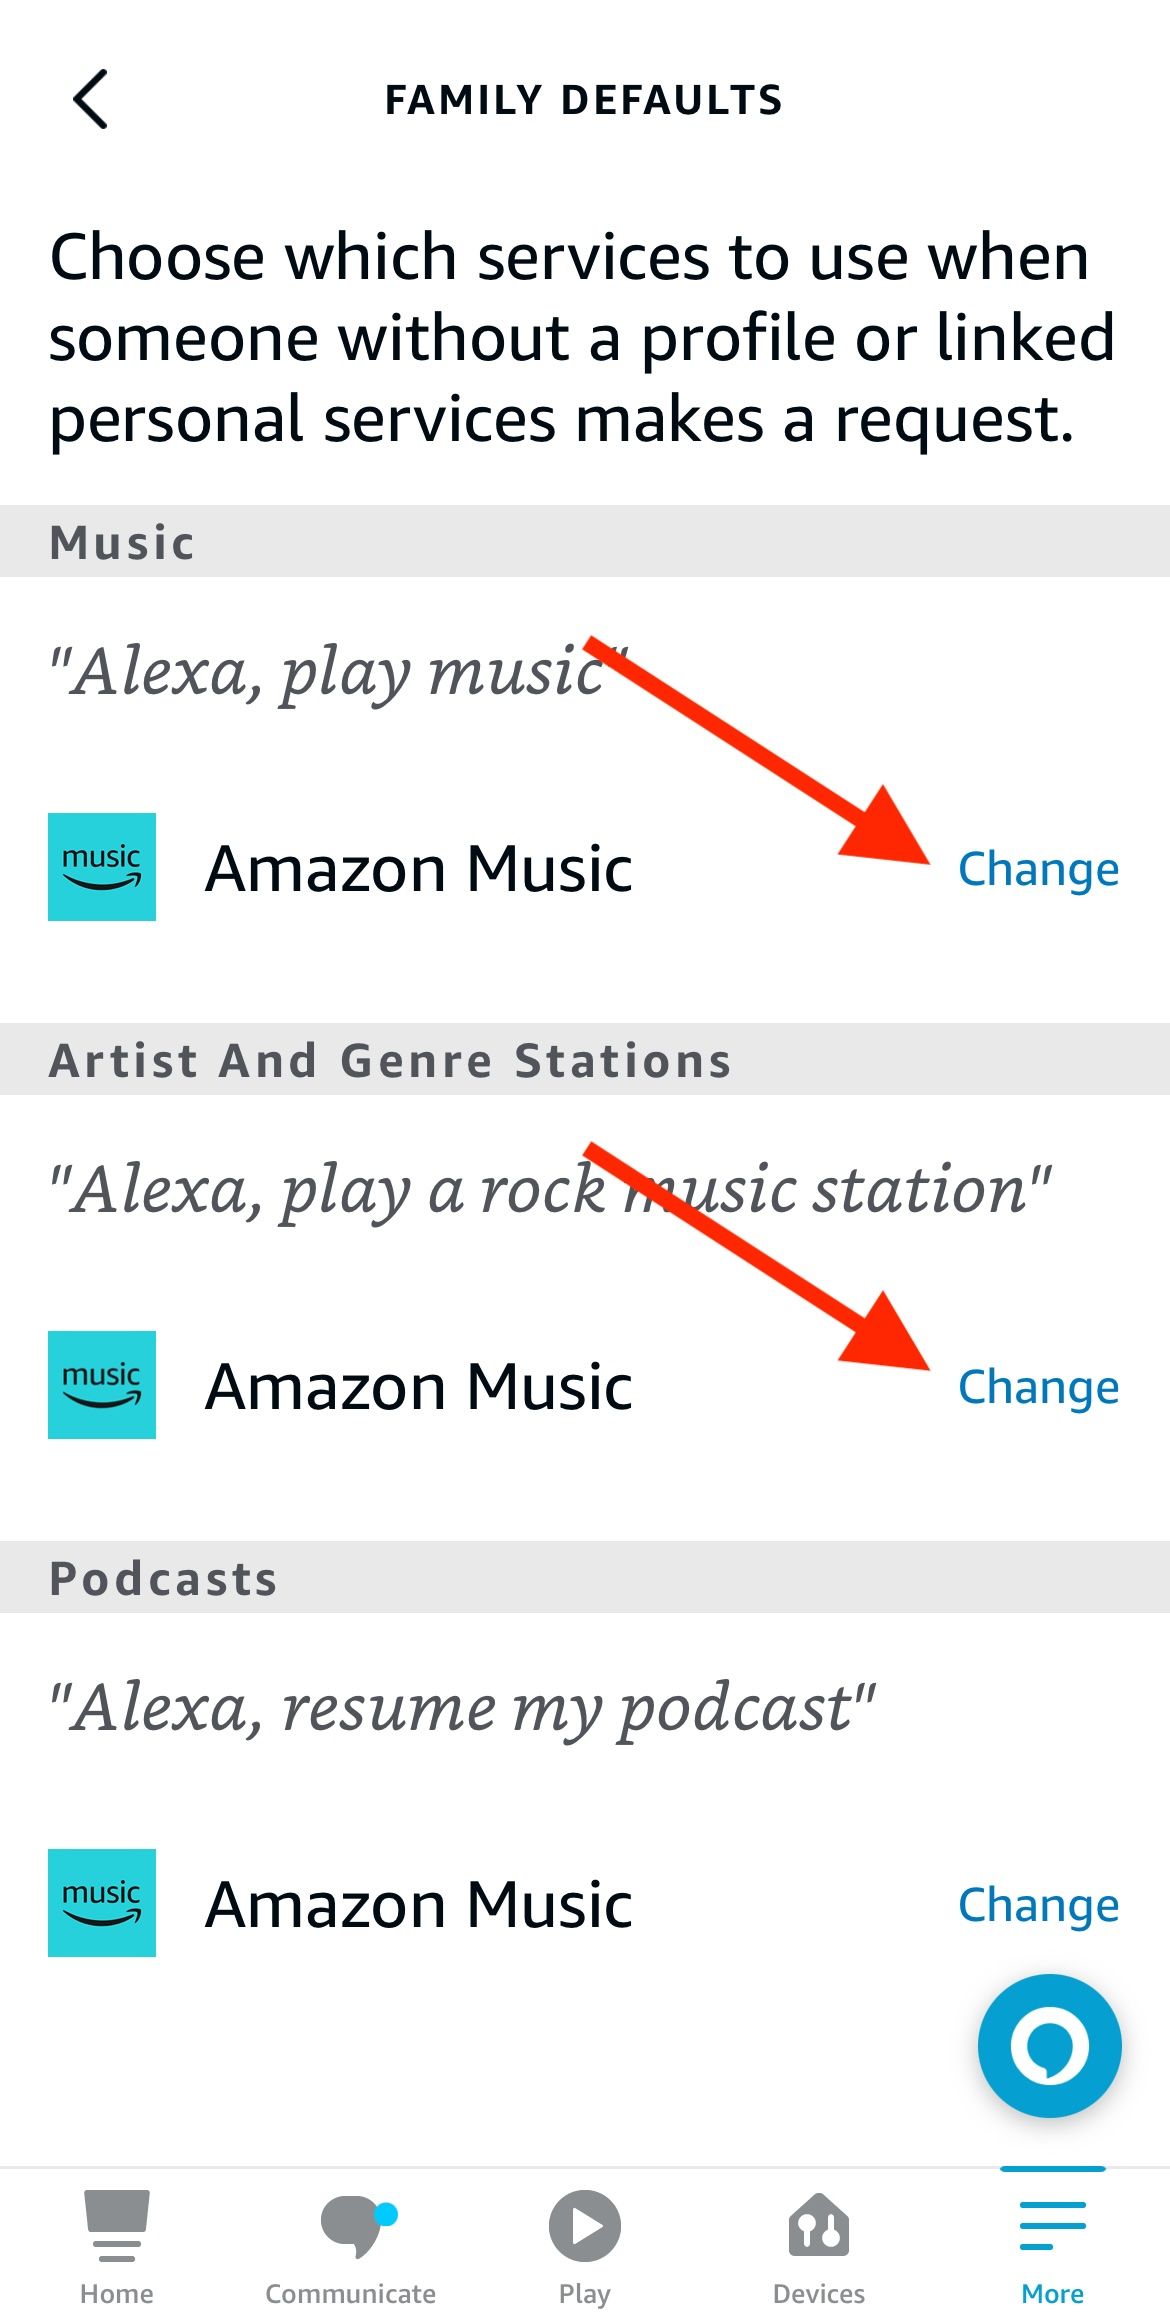 The Alexa app music settings with red arrows pointing to the change options under Music and Artist and Genre Stations.